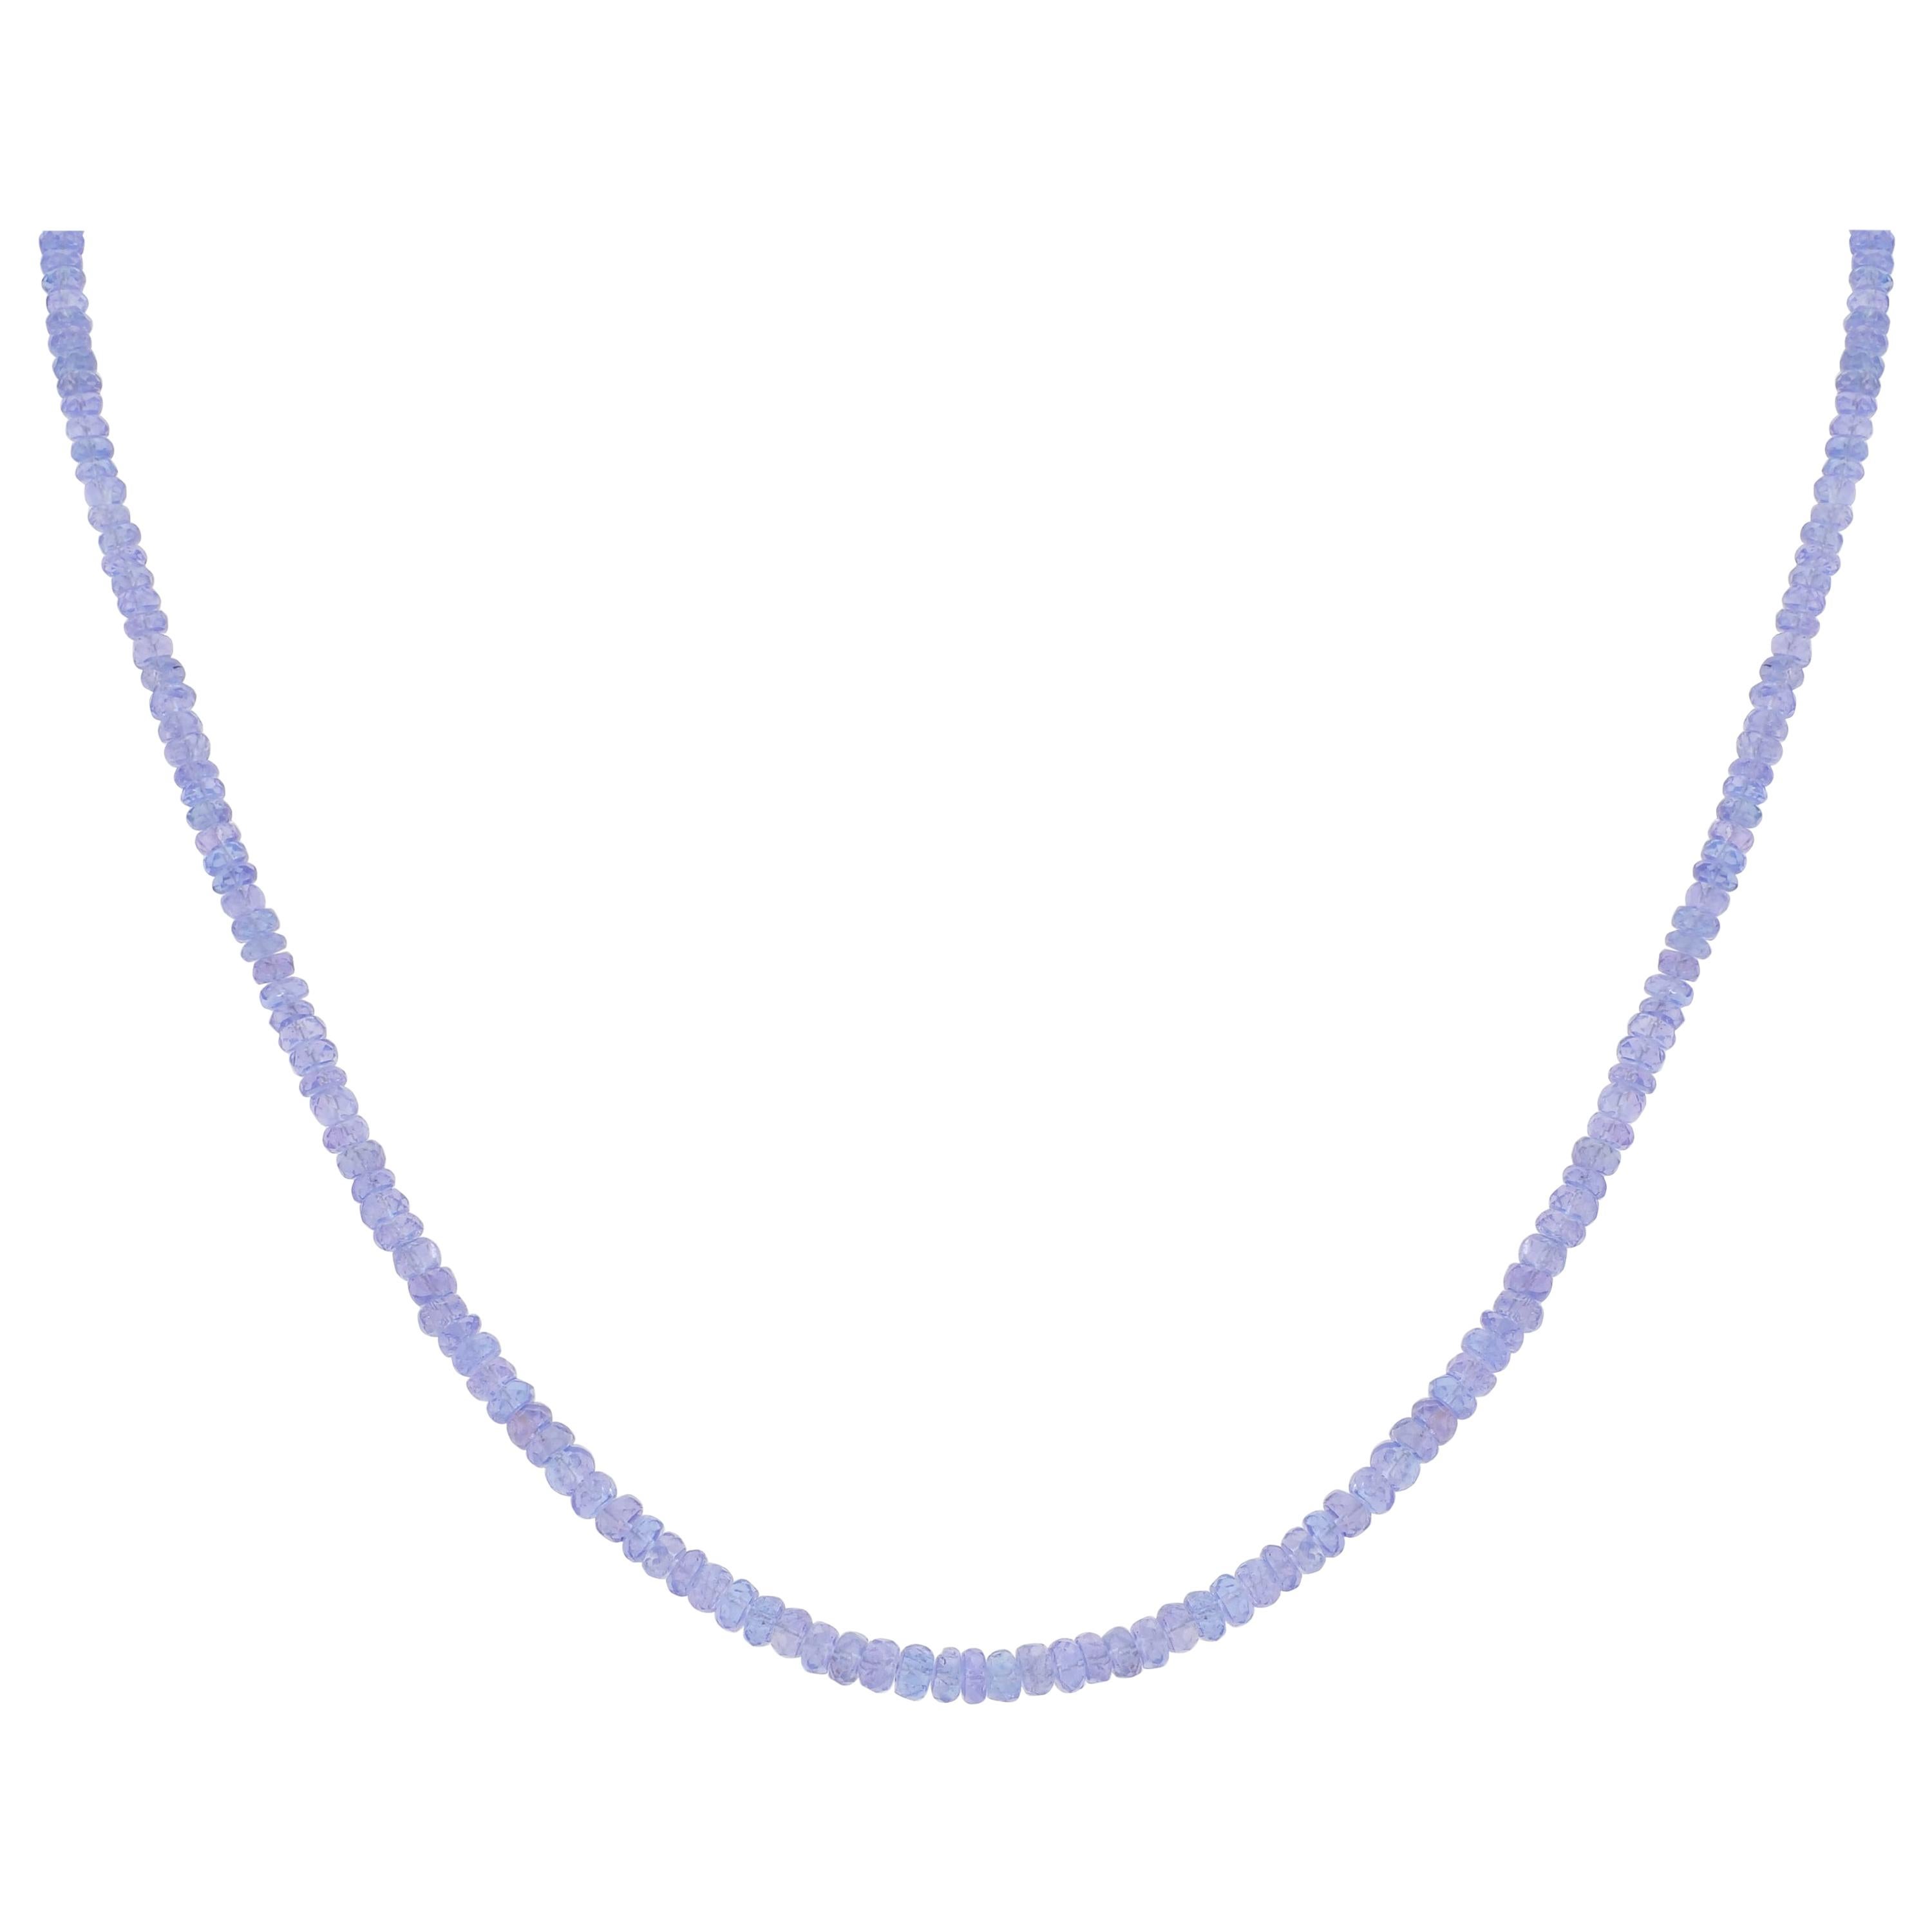 Gemistry 56.57 Carat Tanzanite Beads Necklace in 925 Sterling Silver For Sale